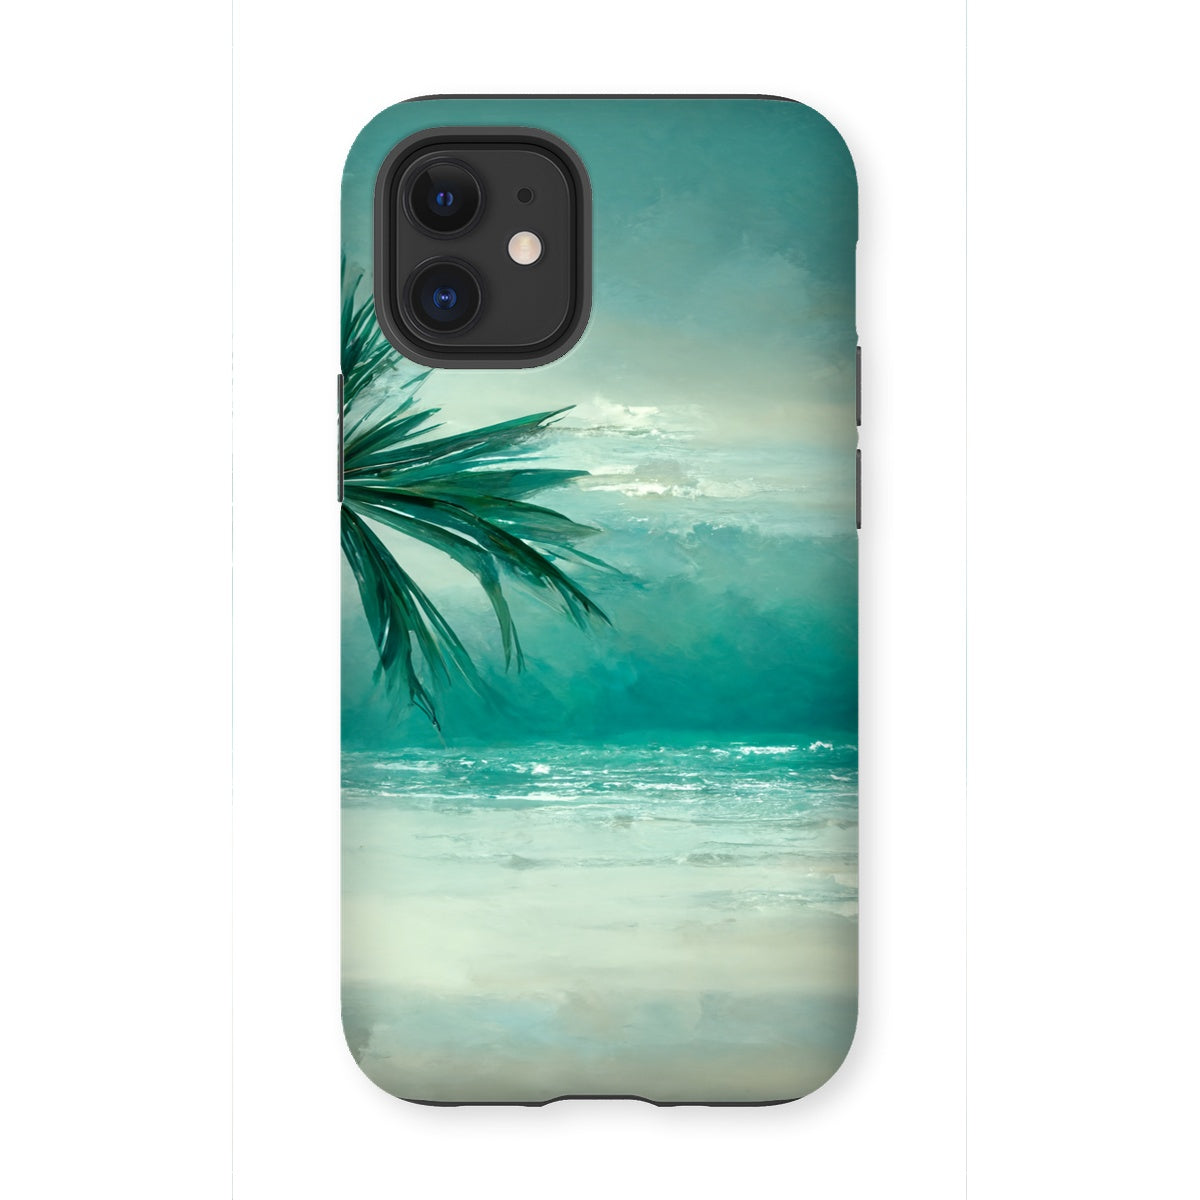 Lonesome Palm Tough Phone Case